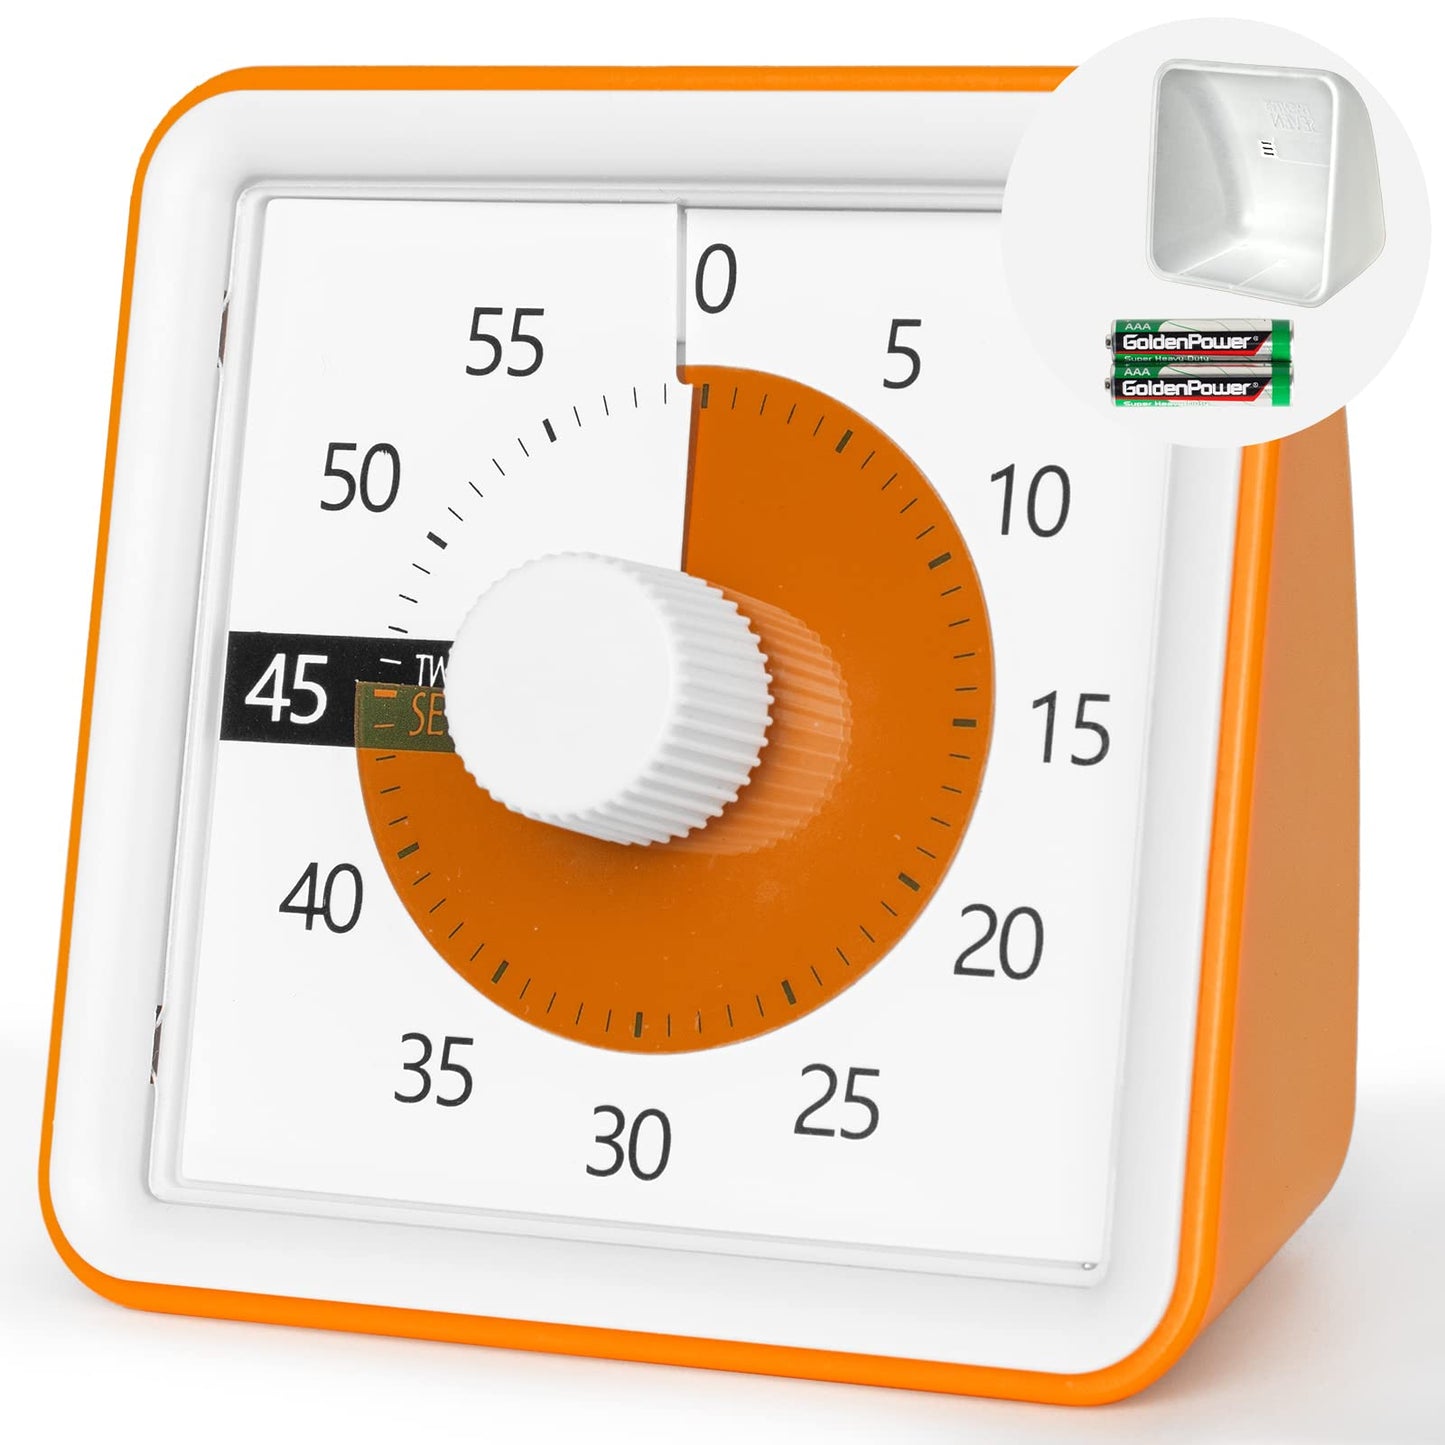 Visual Timer with Protective Case, 60-Minute Countdown Timer for Kids Autism ADHD Classroom Home Office, Countdown Clock for Teaching Work Meeting, Pomodoro Timer for Time Management Education, Orange